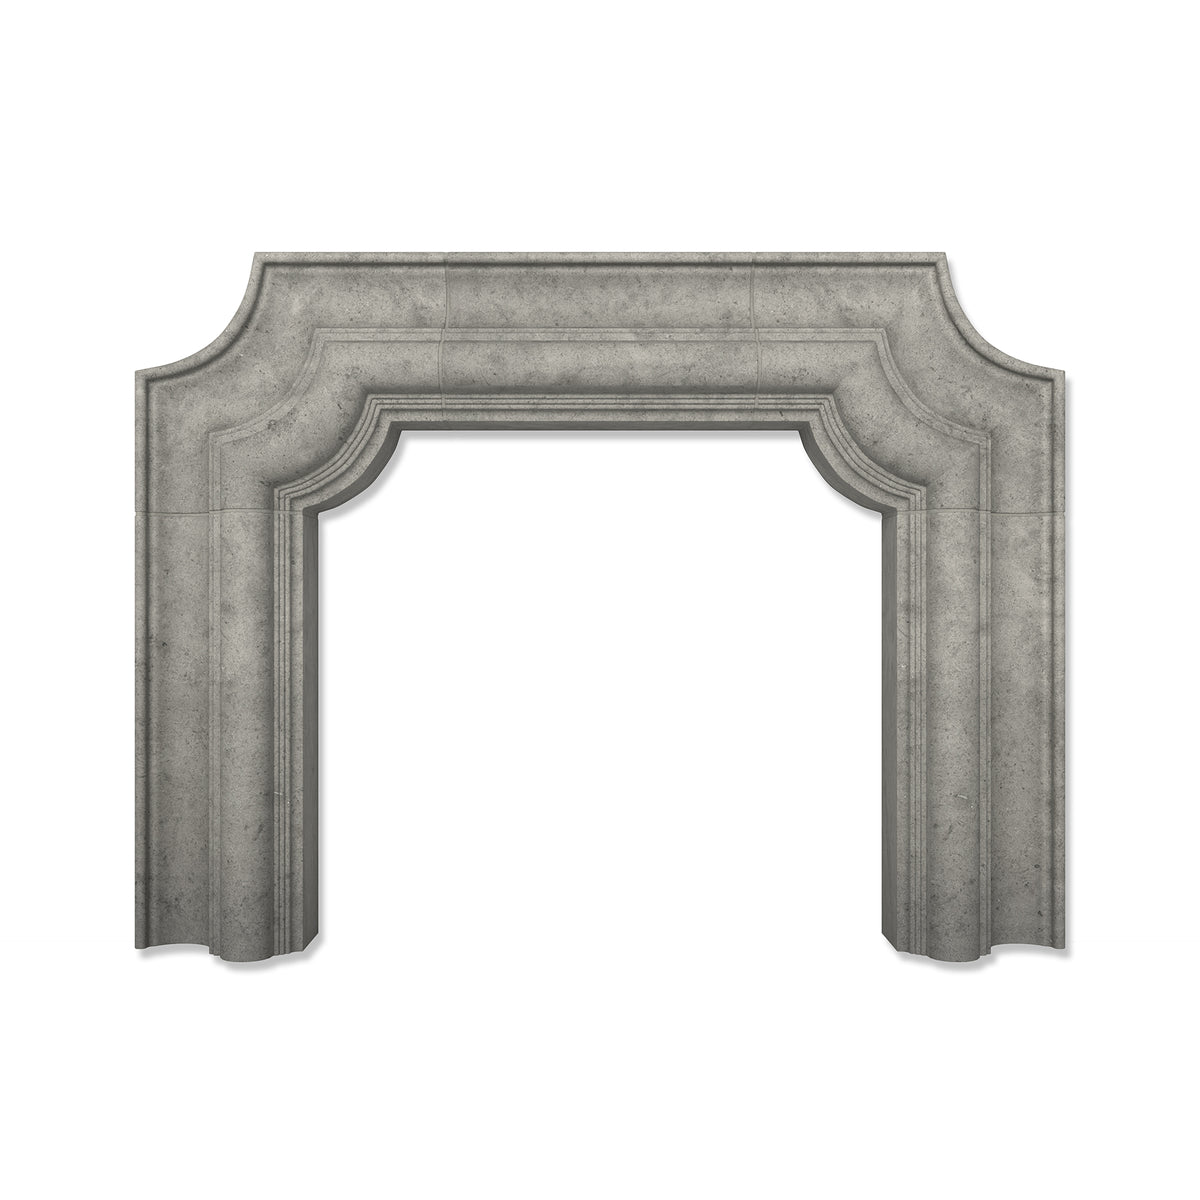 Luca shown in Charcoal Limestone. Main Product Slider View